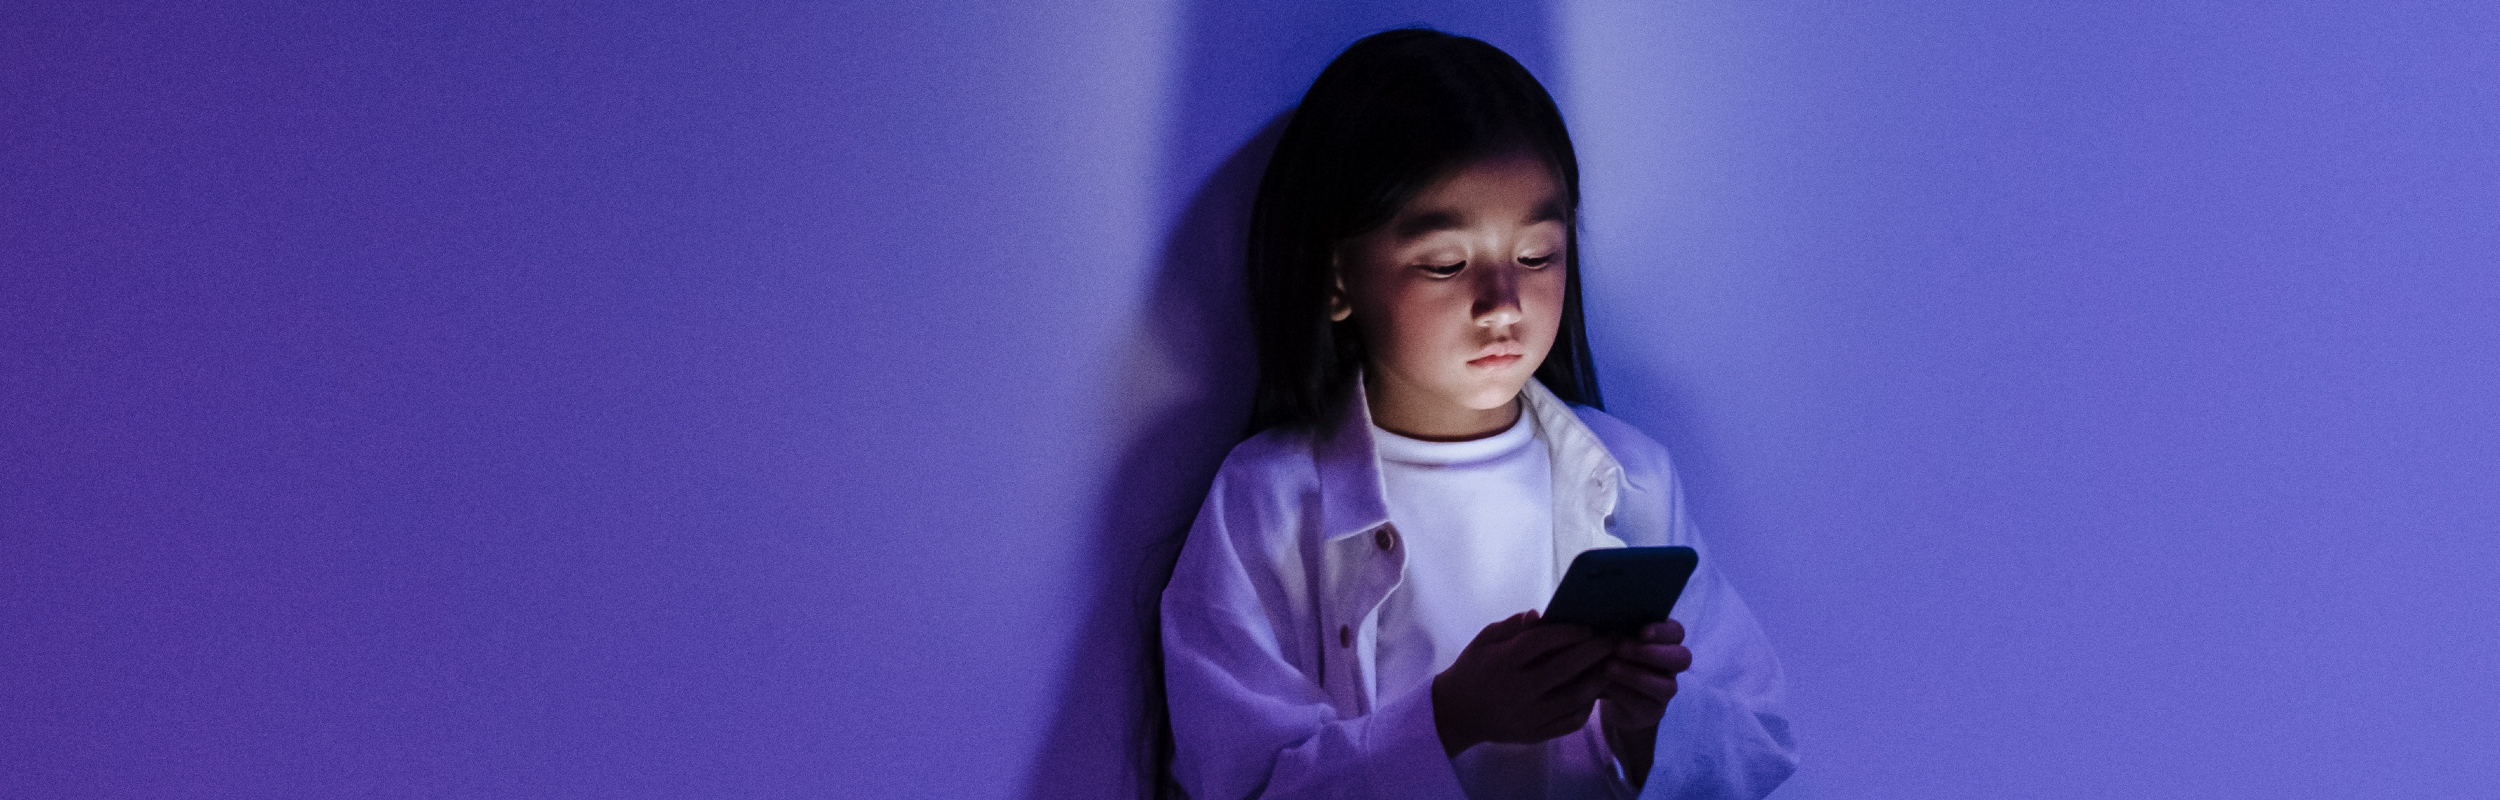 What to be mindful of: children’s mental health and the digital environment